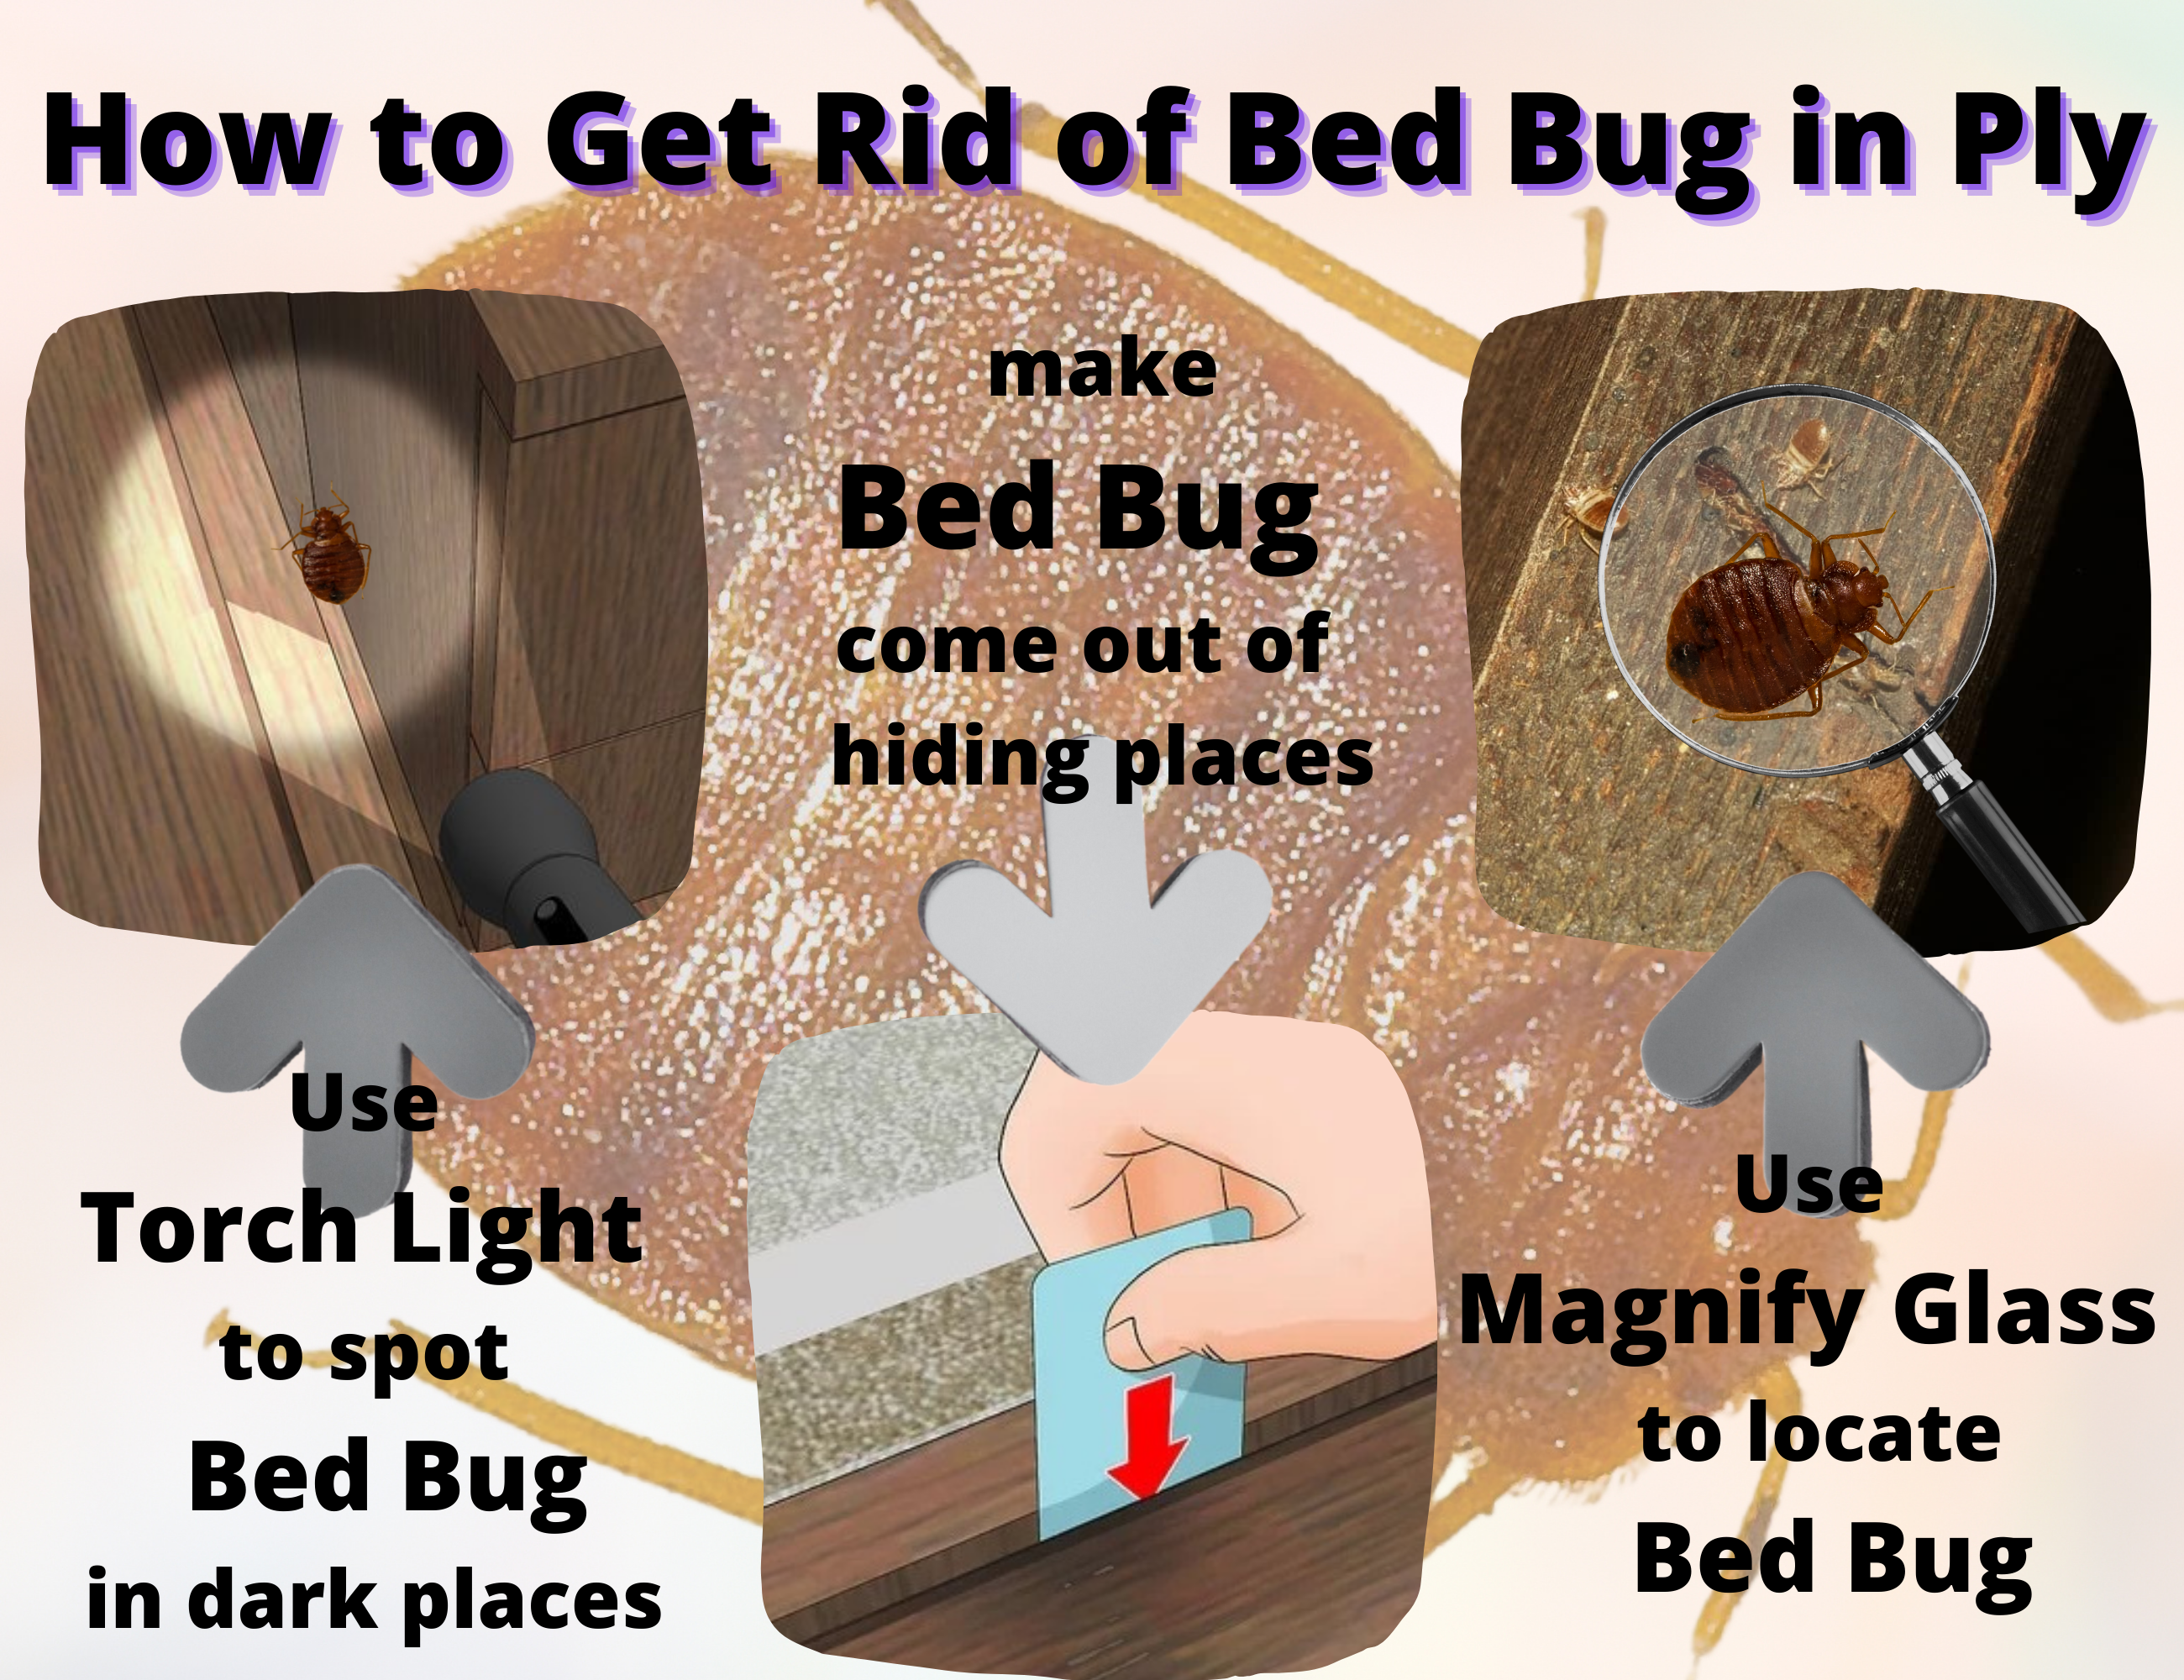 How to get rid of bed bugs in ply?